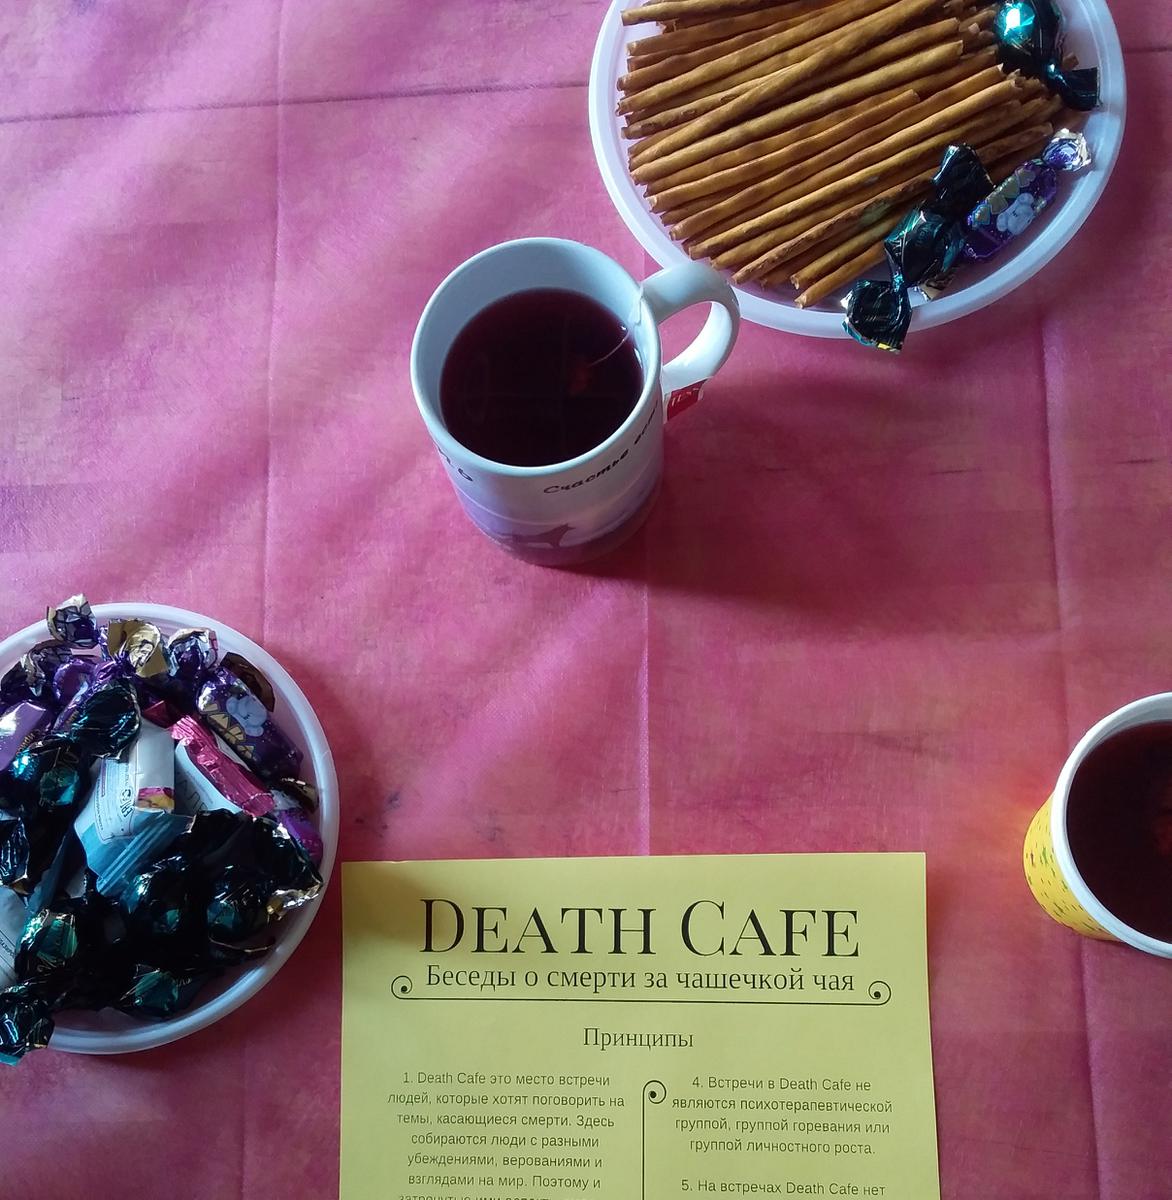 Death Cafe in Moscow office